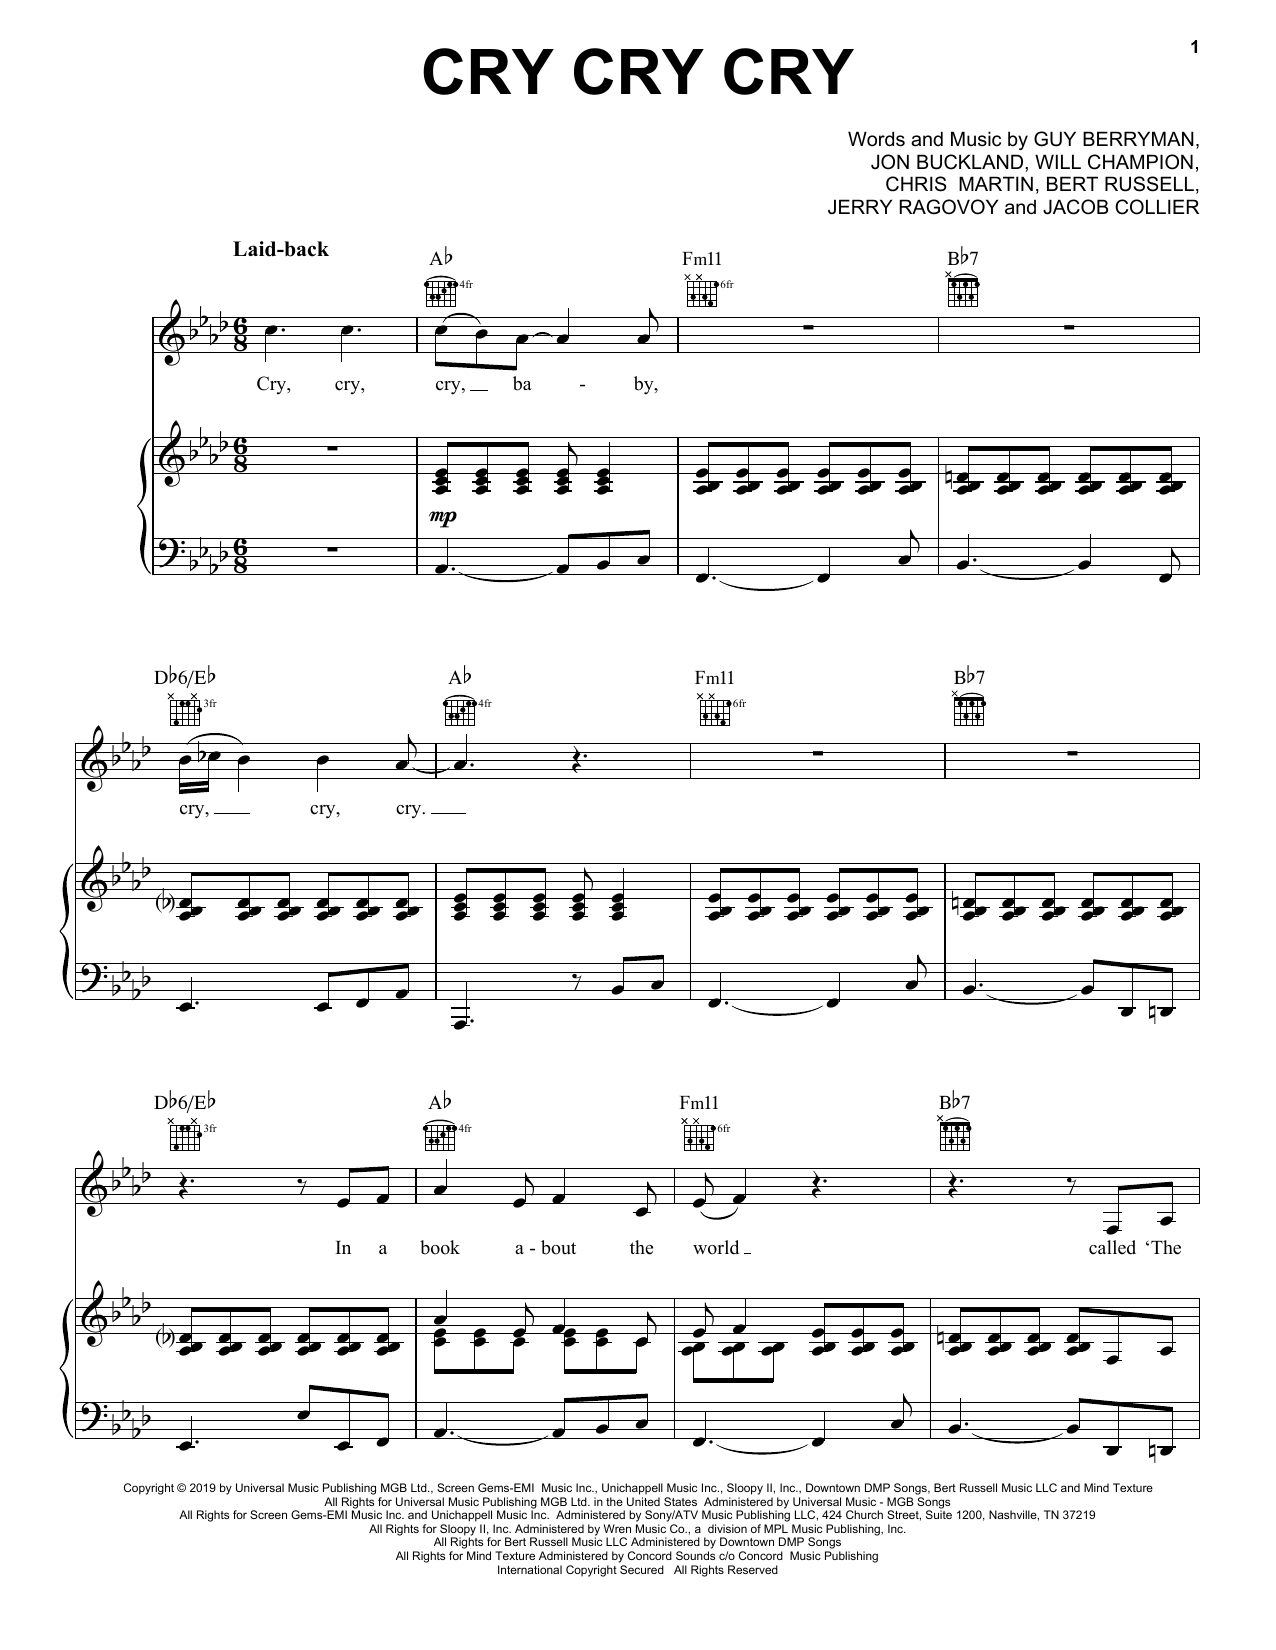 Download Coldplay Cry Cry Cry Sheet Music